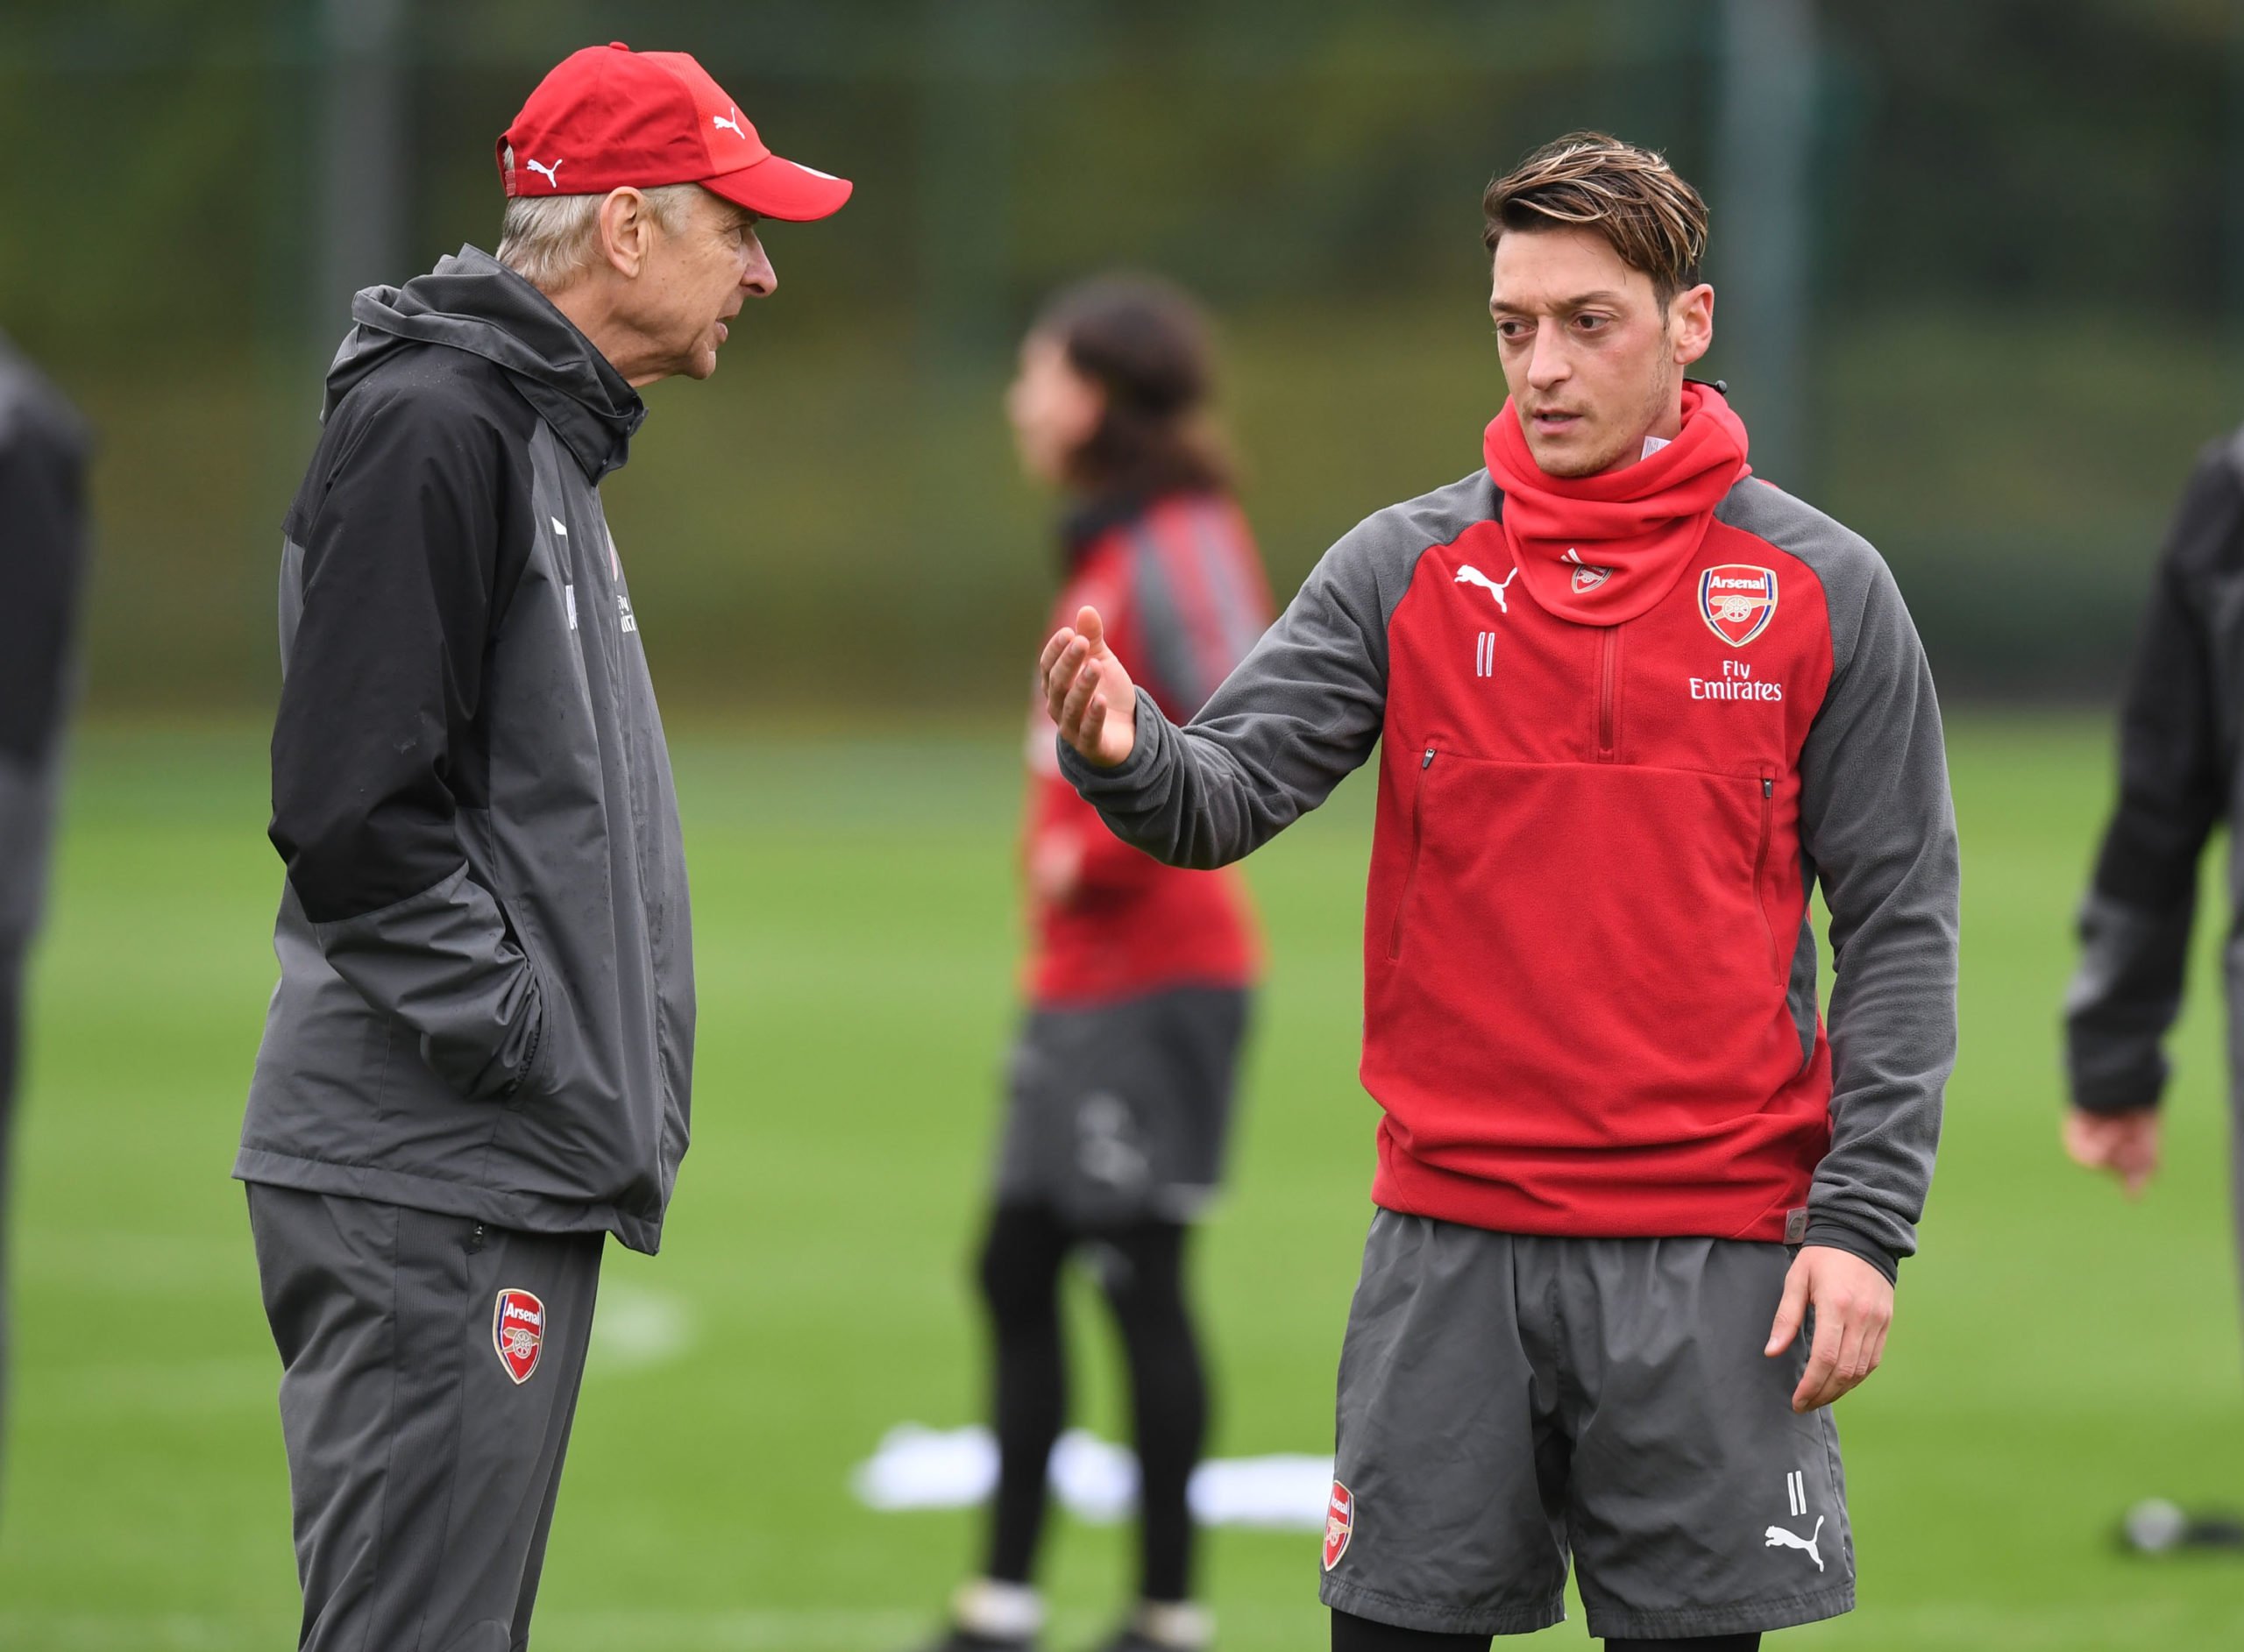 ‘Find a way’: Arsene Wenger comments on misfit midfielder’s Arsenal status